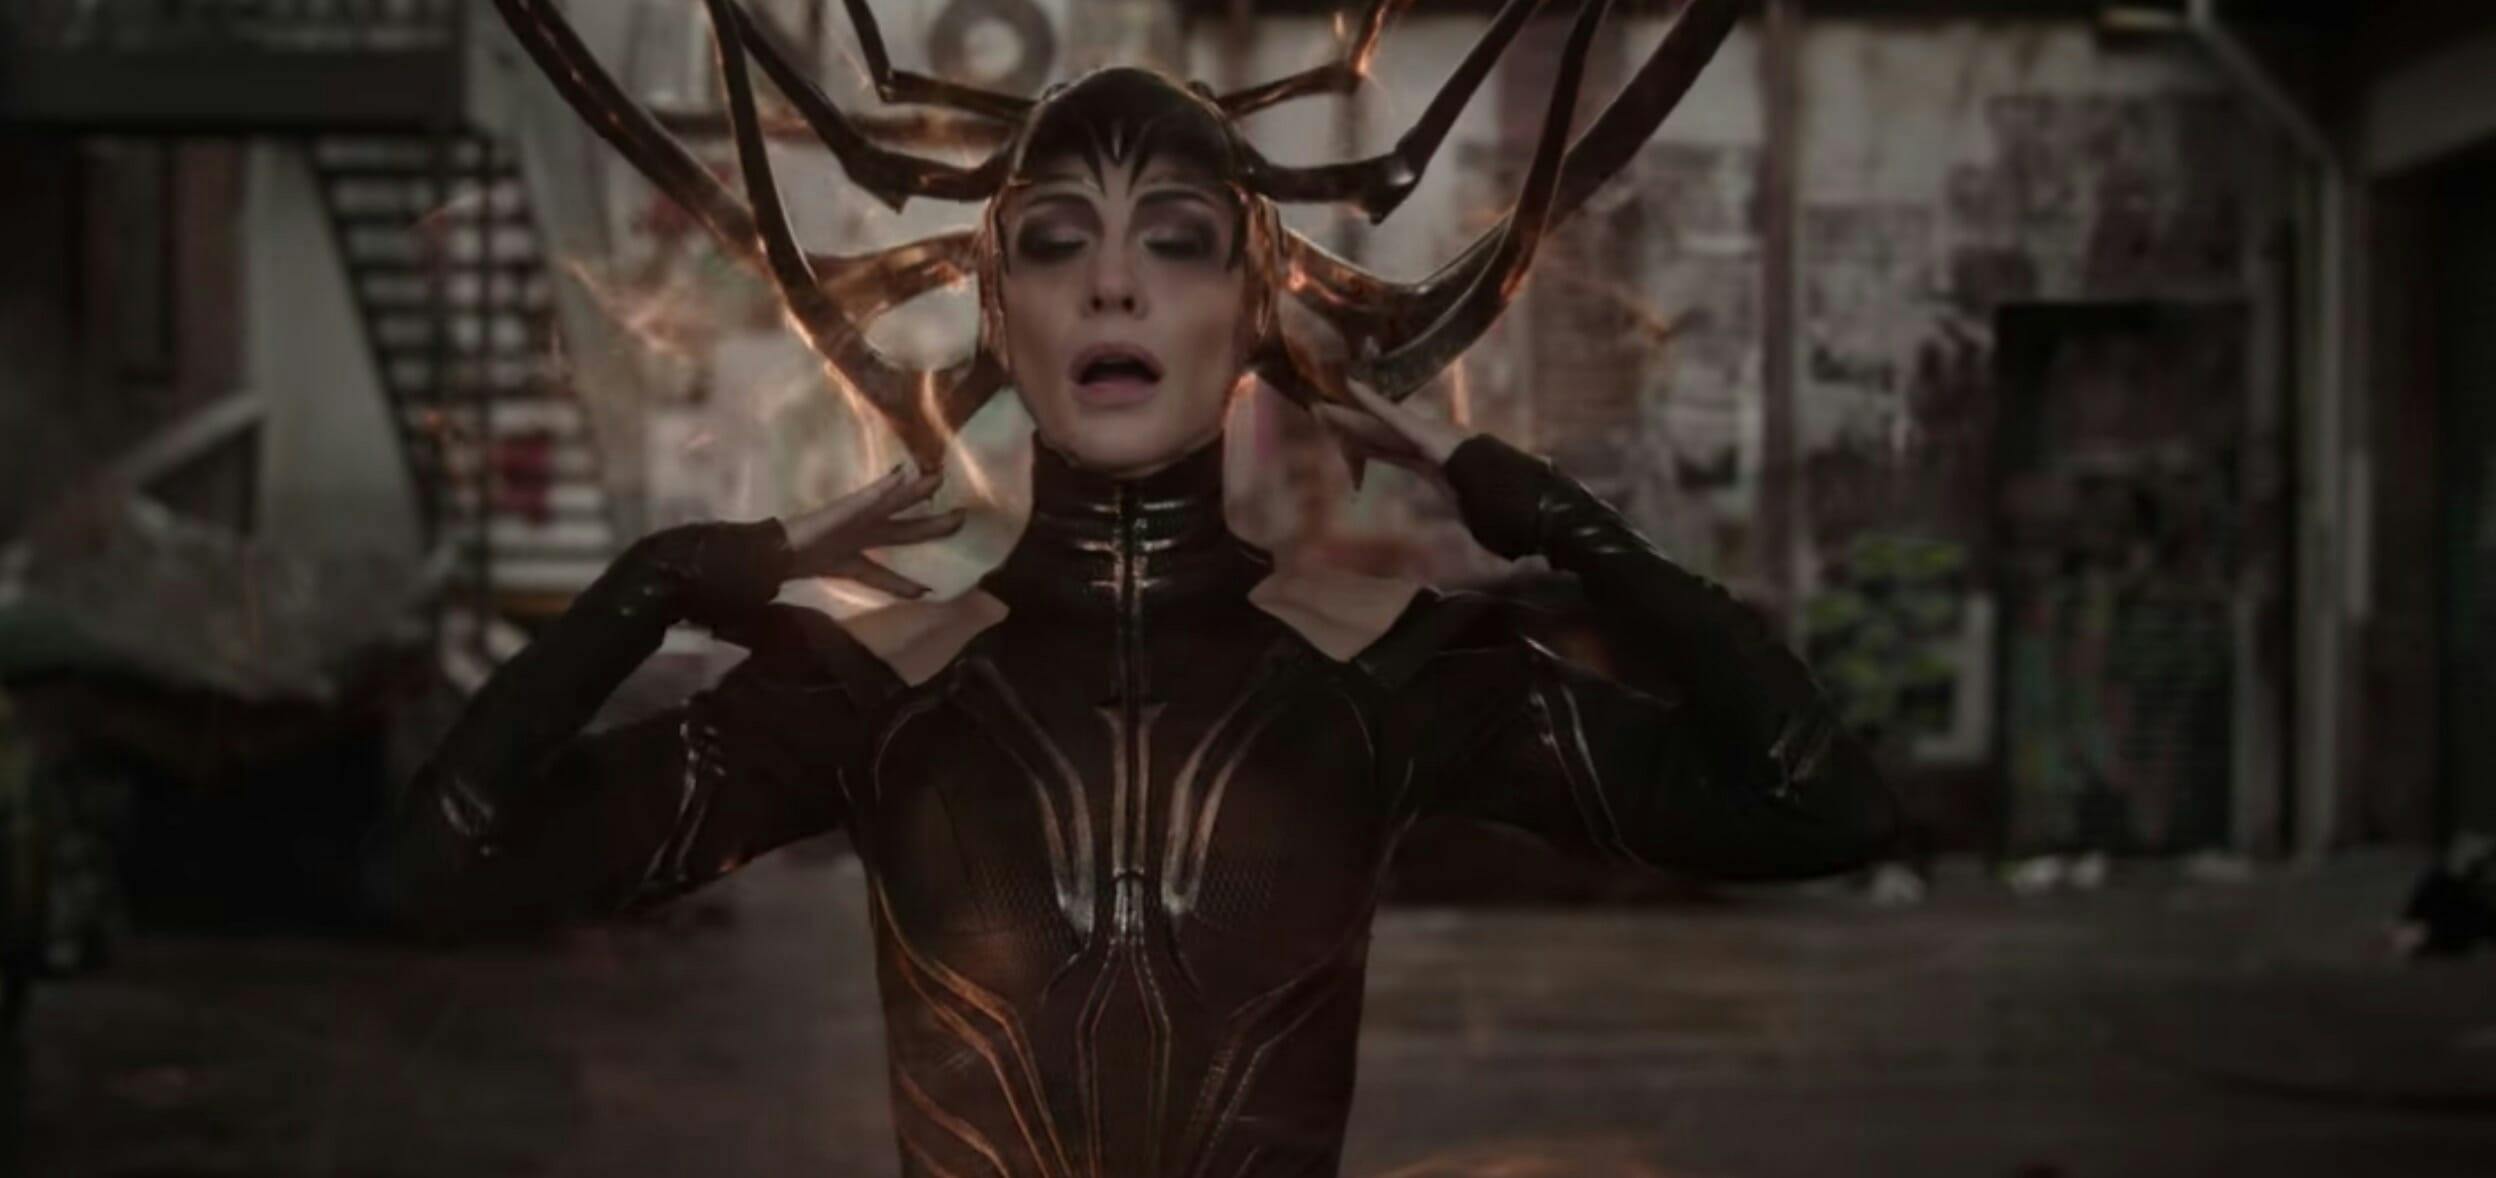 mcu phase 3 villains - hela from Thor